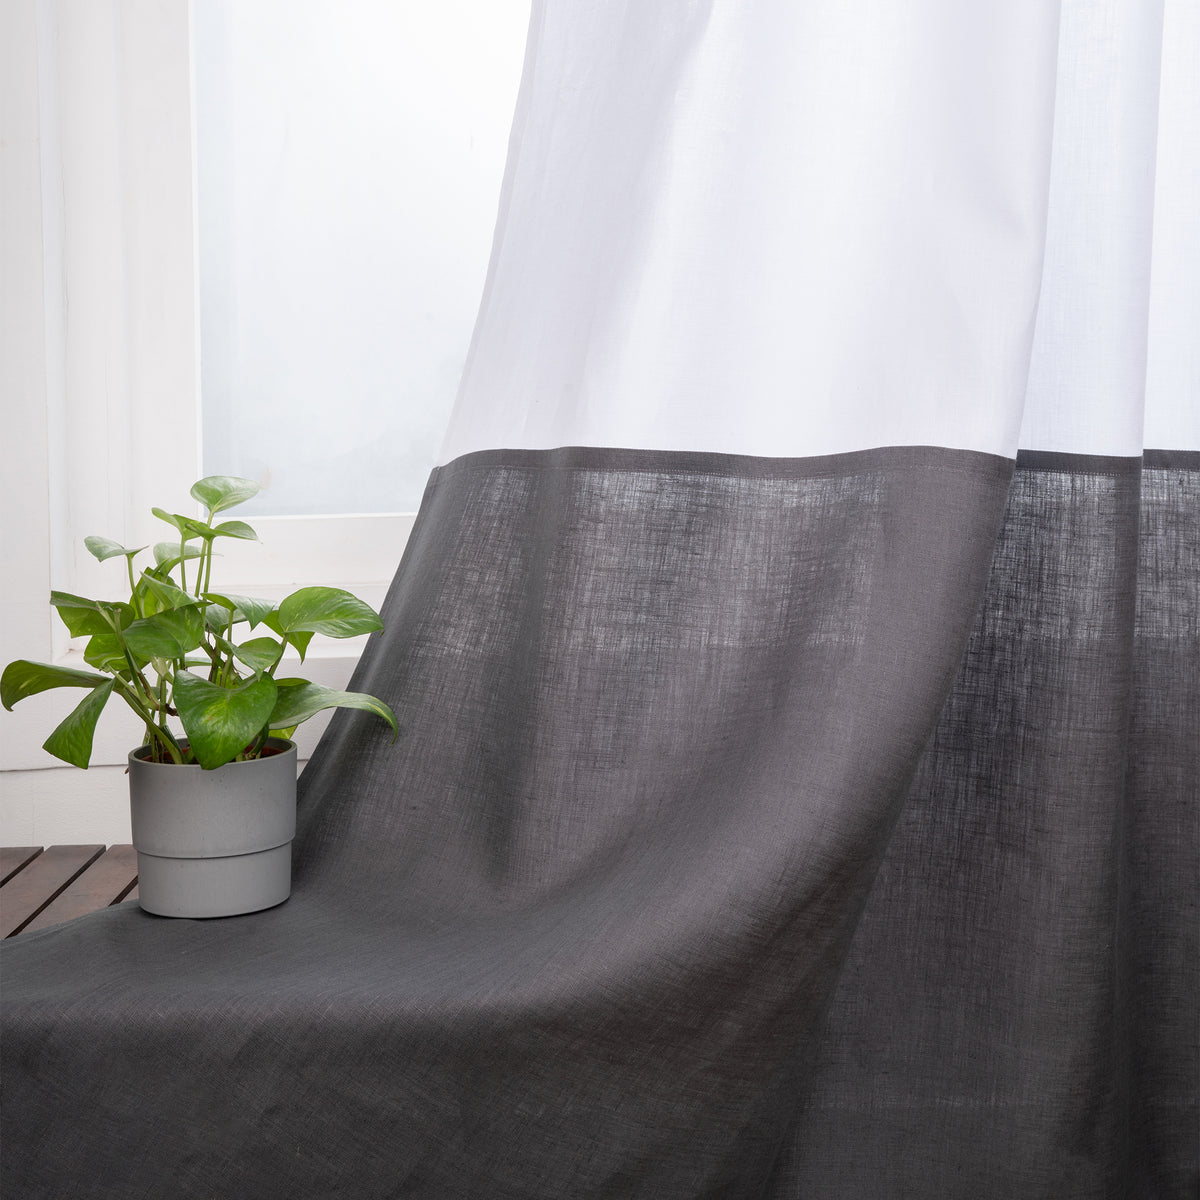 White & Charcoal Grey Linen Color Block Curtains | 1 Panel